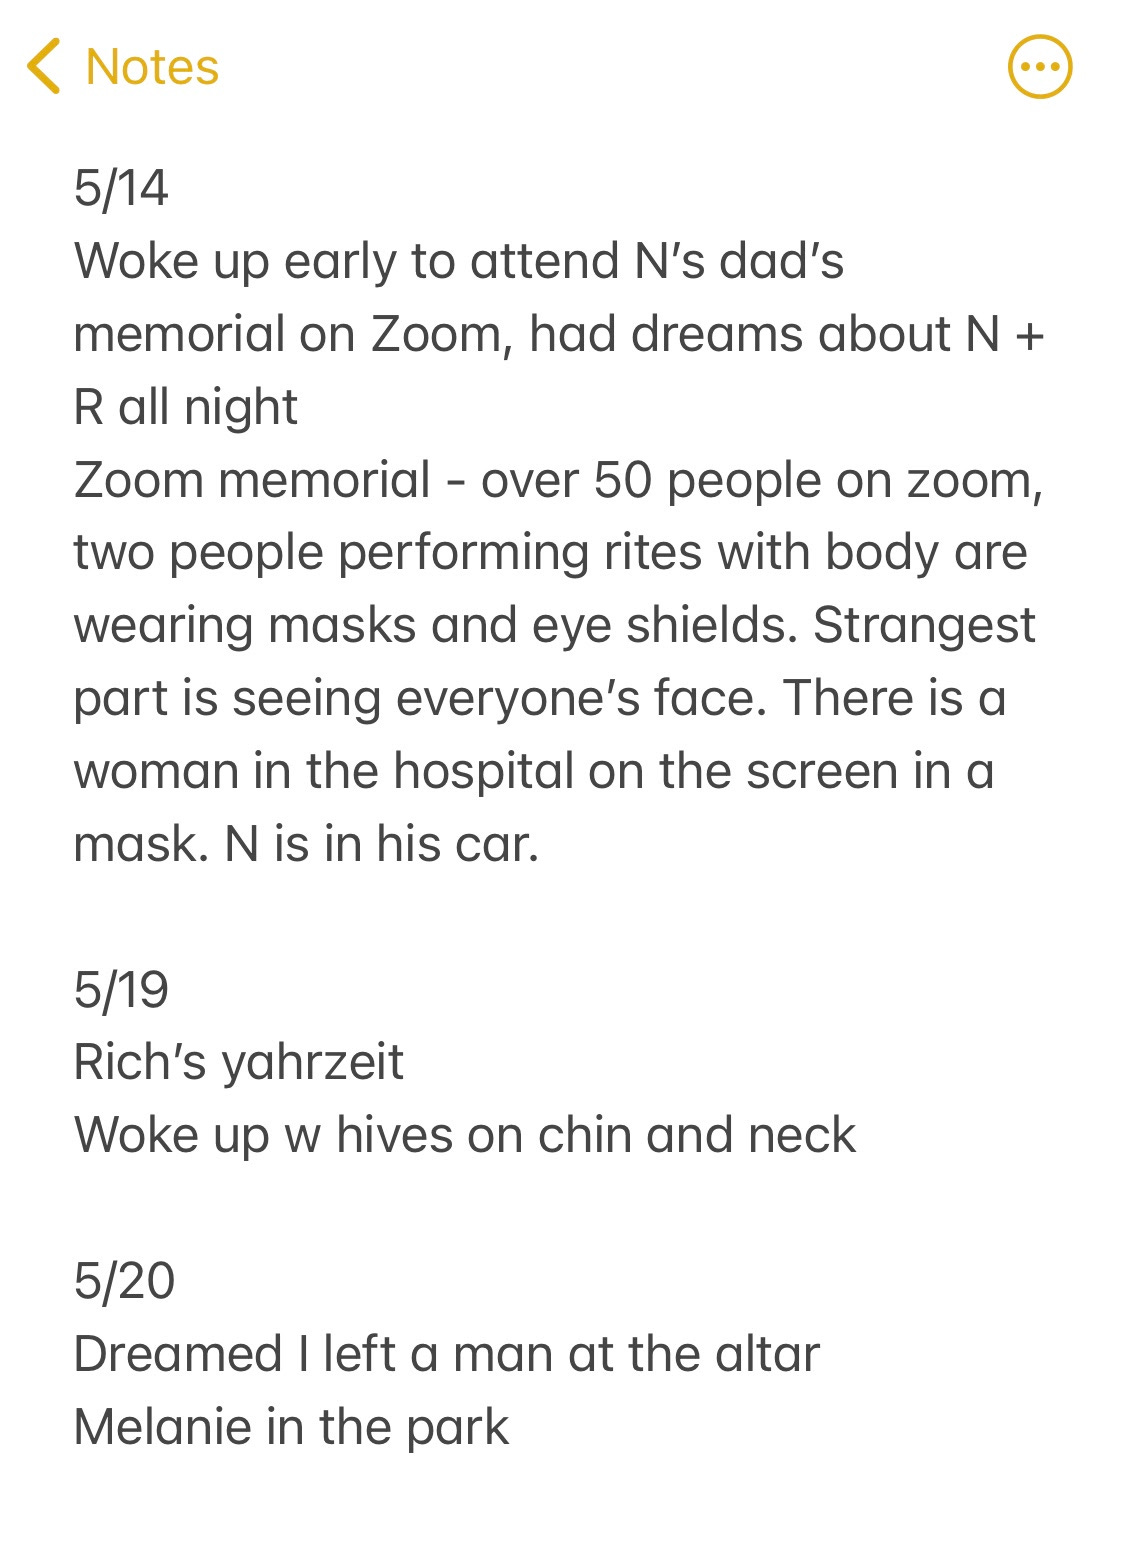 Screenshot of a phone note that says, “May 14th. Woke up early to attend N’s dad’s memorial on Zoom, had dreams about N & R all night. Zoom memorial - over 50 people on Zoom, two people performing rites with body are wearing masks and eye shields. Strangest part is seeing everyone’s face. There is a woman in the hospital on the screen in a mask. N is in his car….May 19th. Rich’s yahrzeit. Woke up w/ hives on chin and neck. May 20th. Dreamed I left a man at the altar. Melanie in the park.”